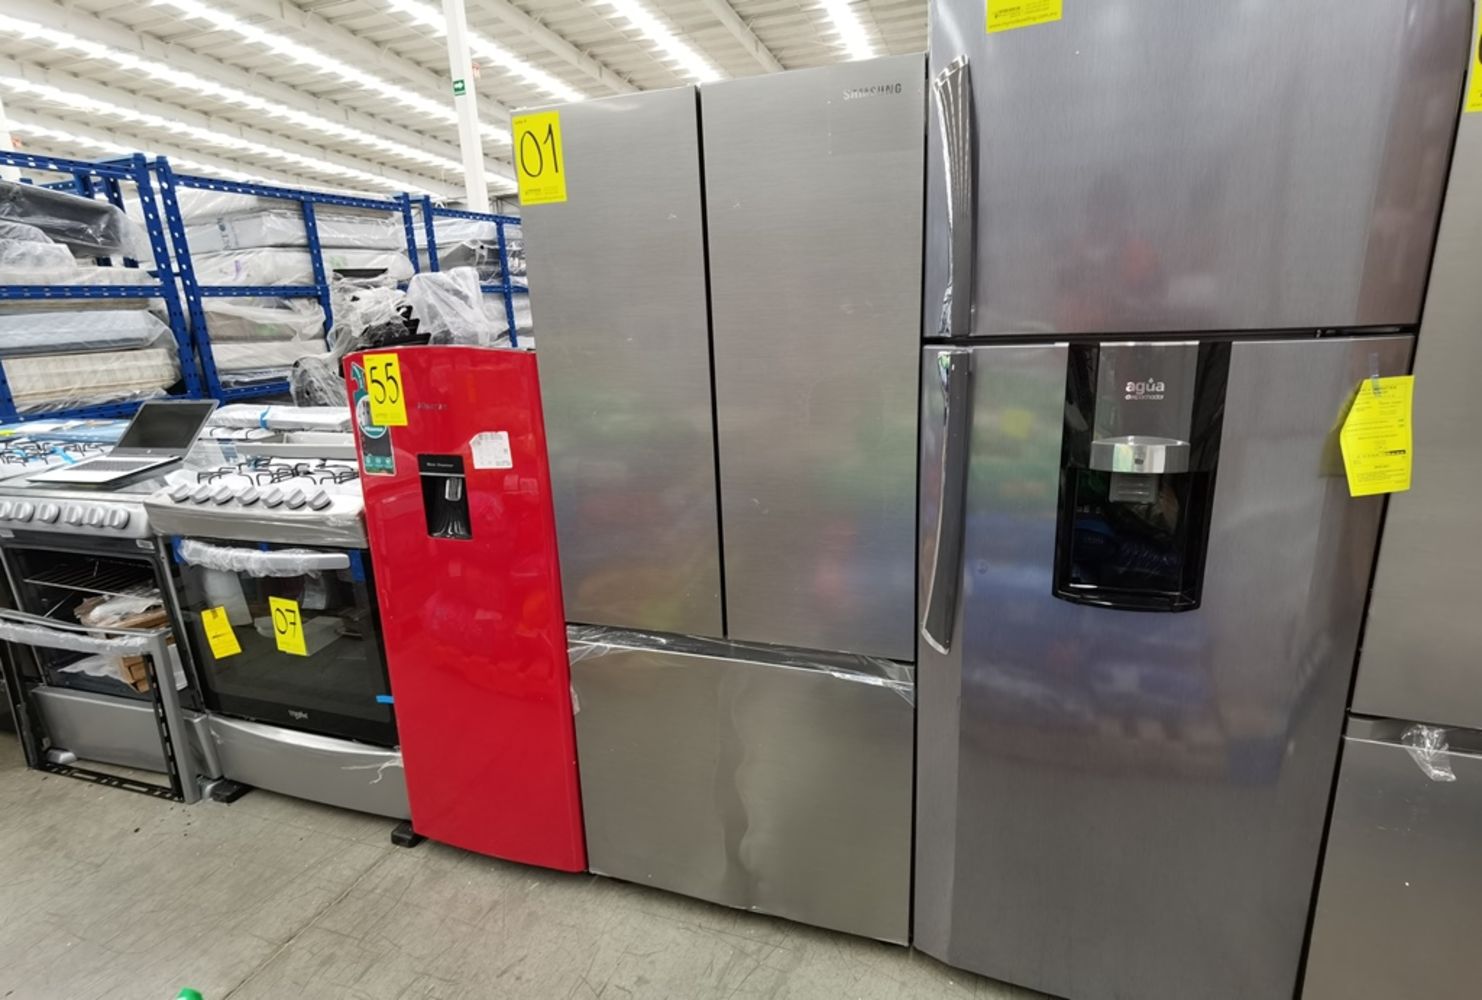 Walmart and Ecommerce Auction - Refrigerators, Freezers, Cooktops, Ovens, Stovetops, Furniture, Mattresses, Washers & Dryers